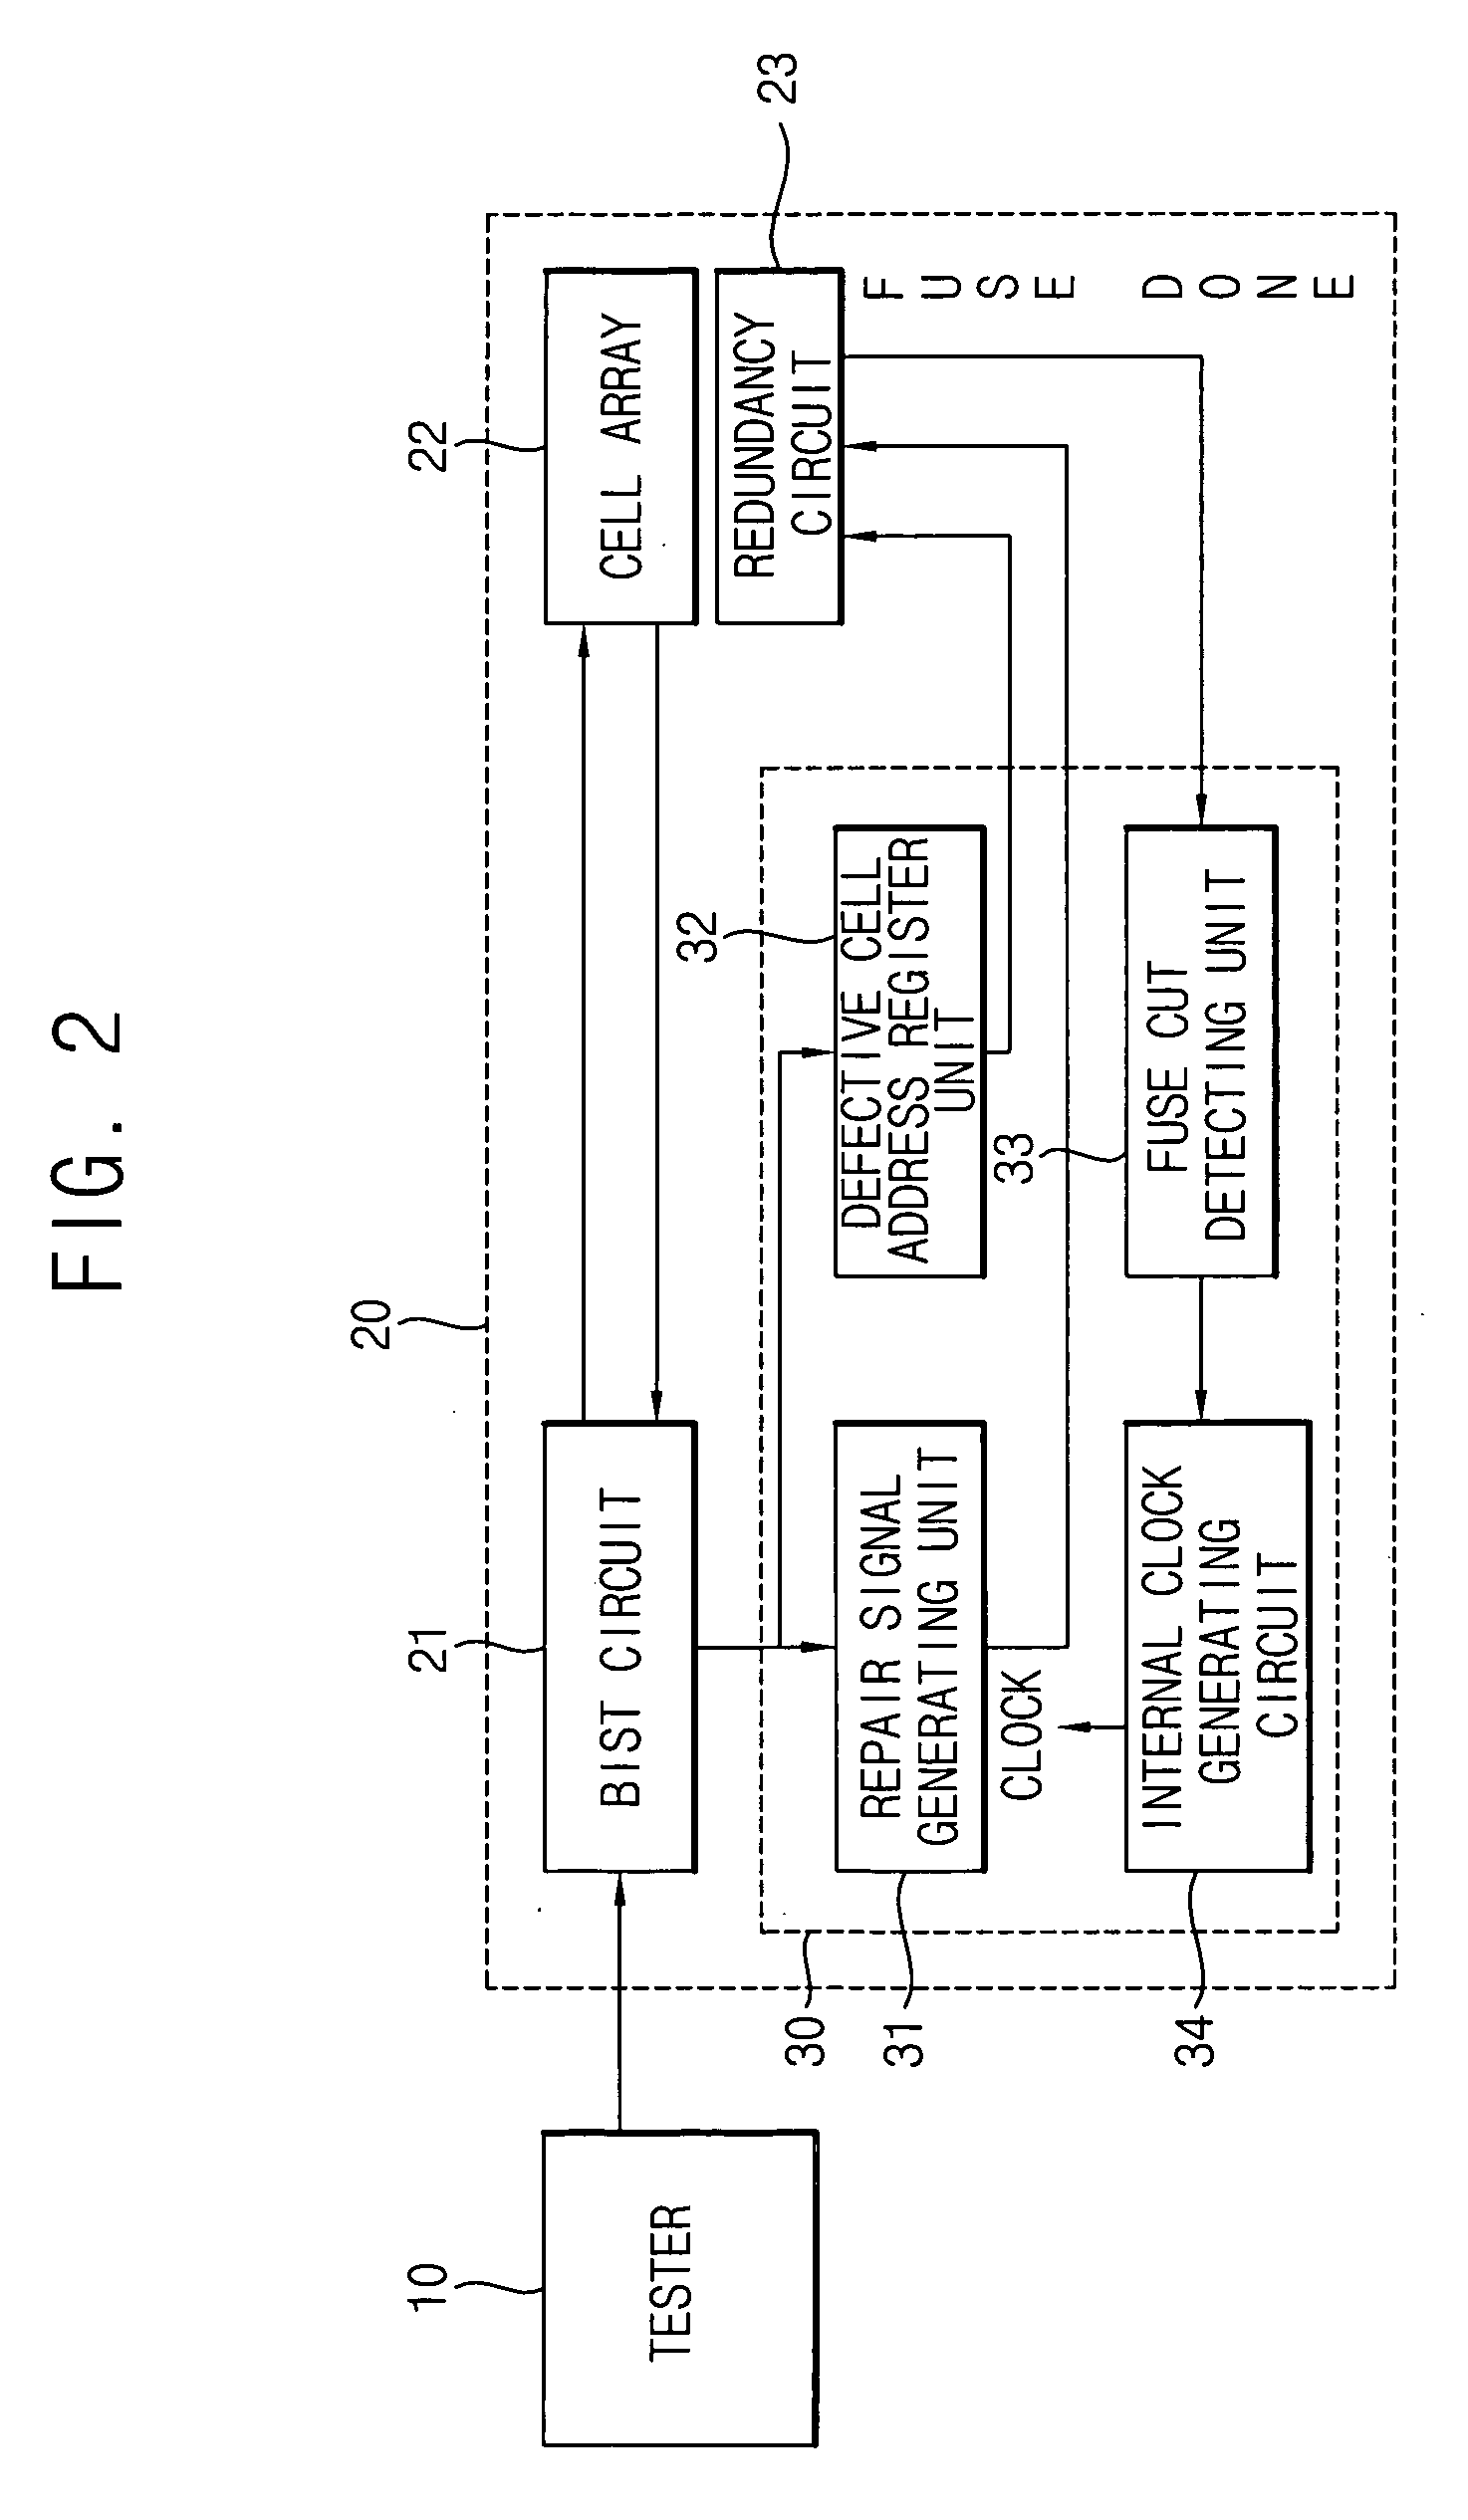 Semiconductor memory devices and a method thereof